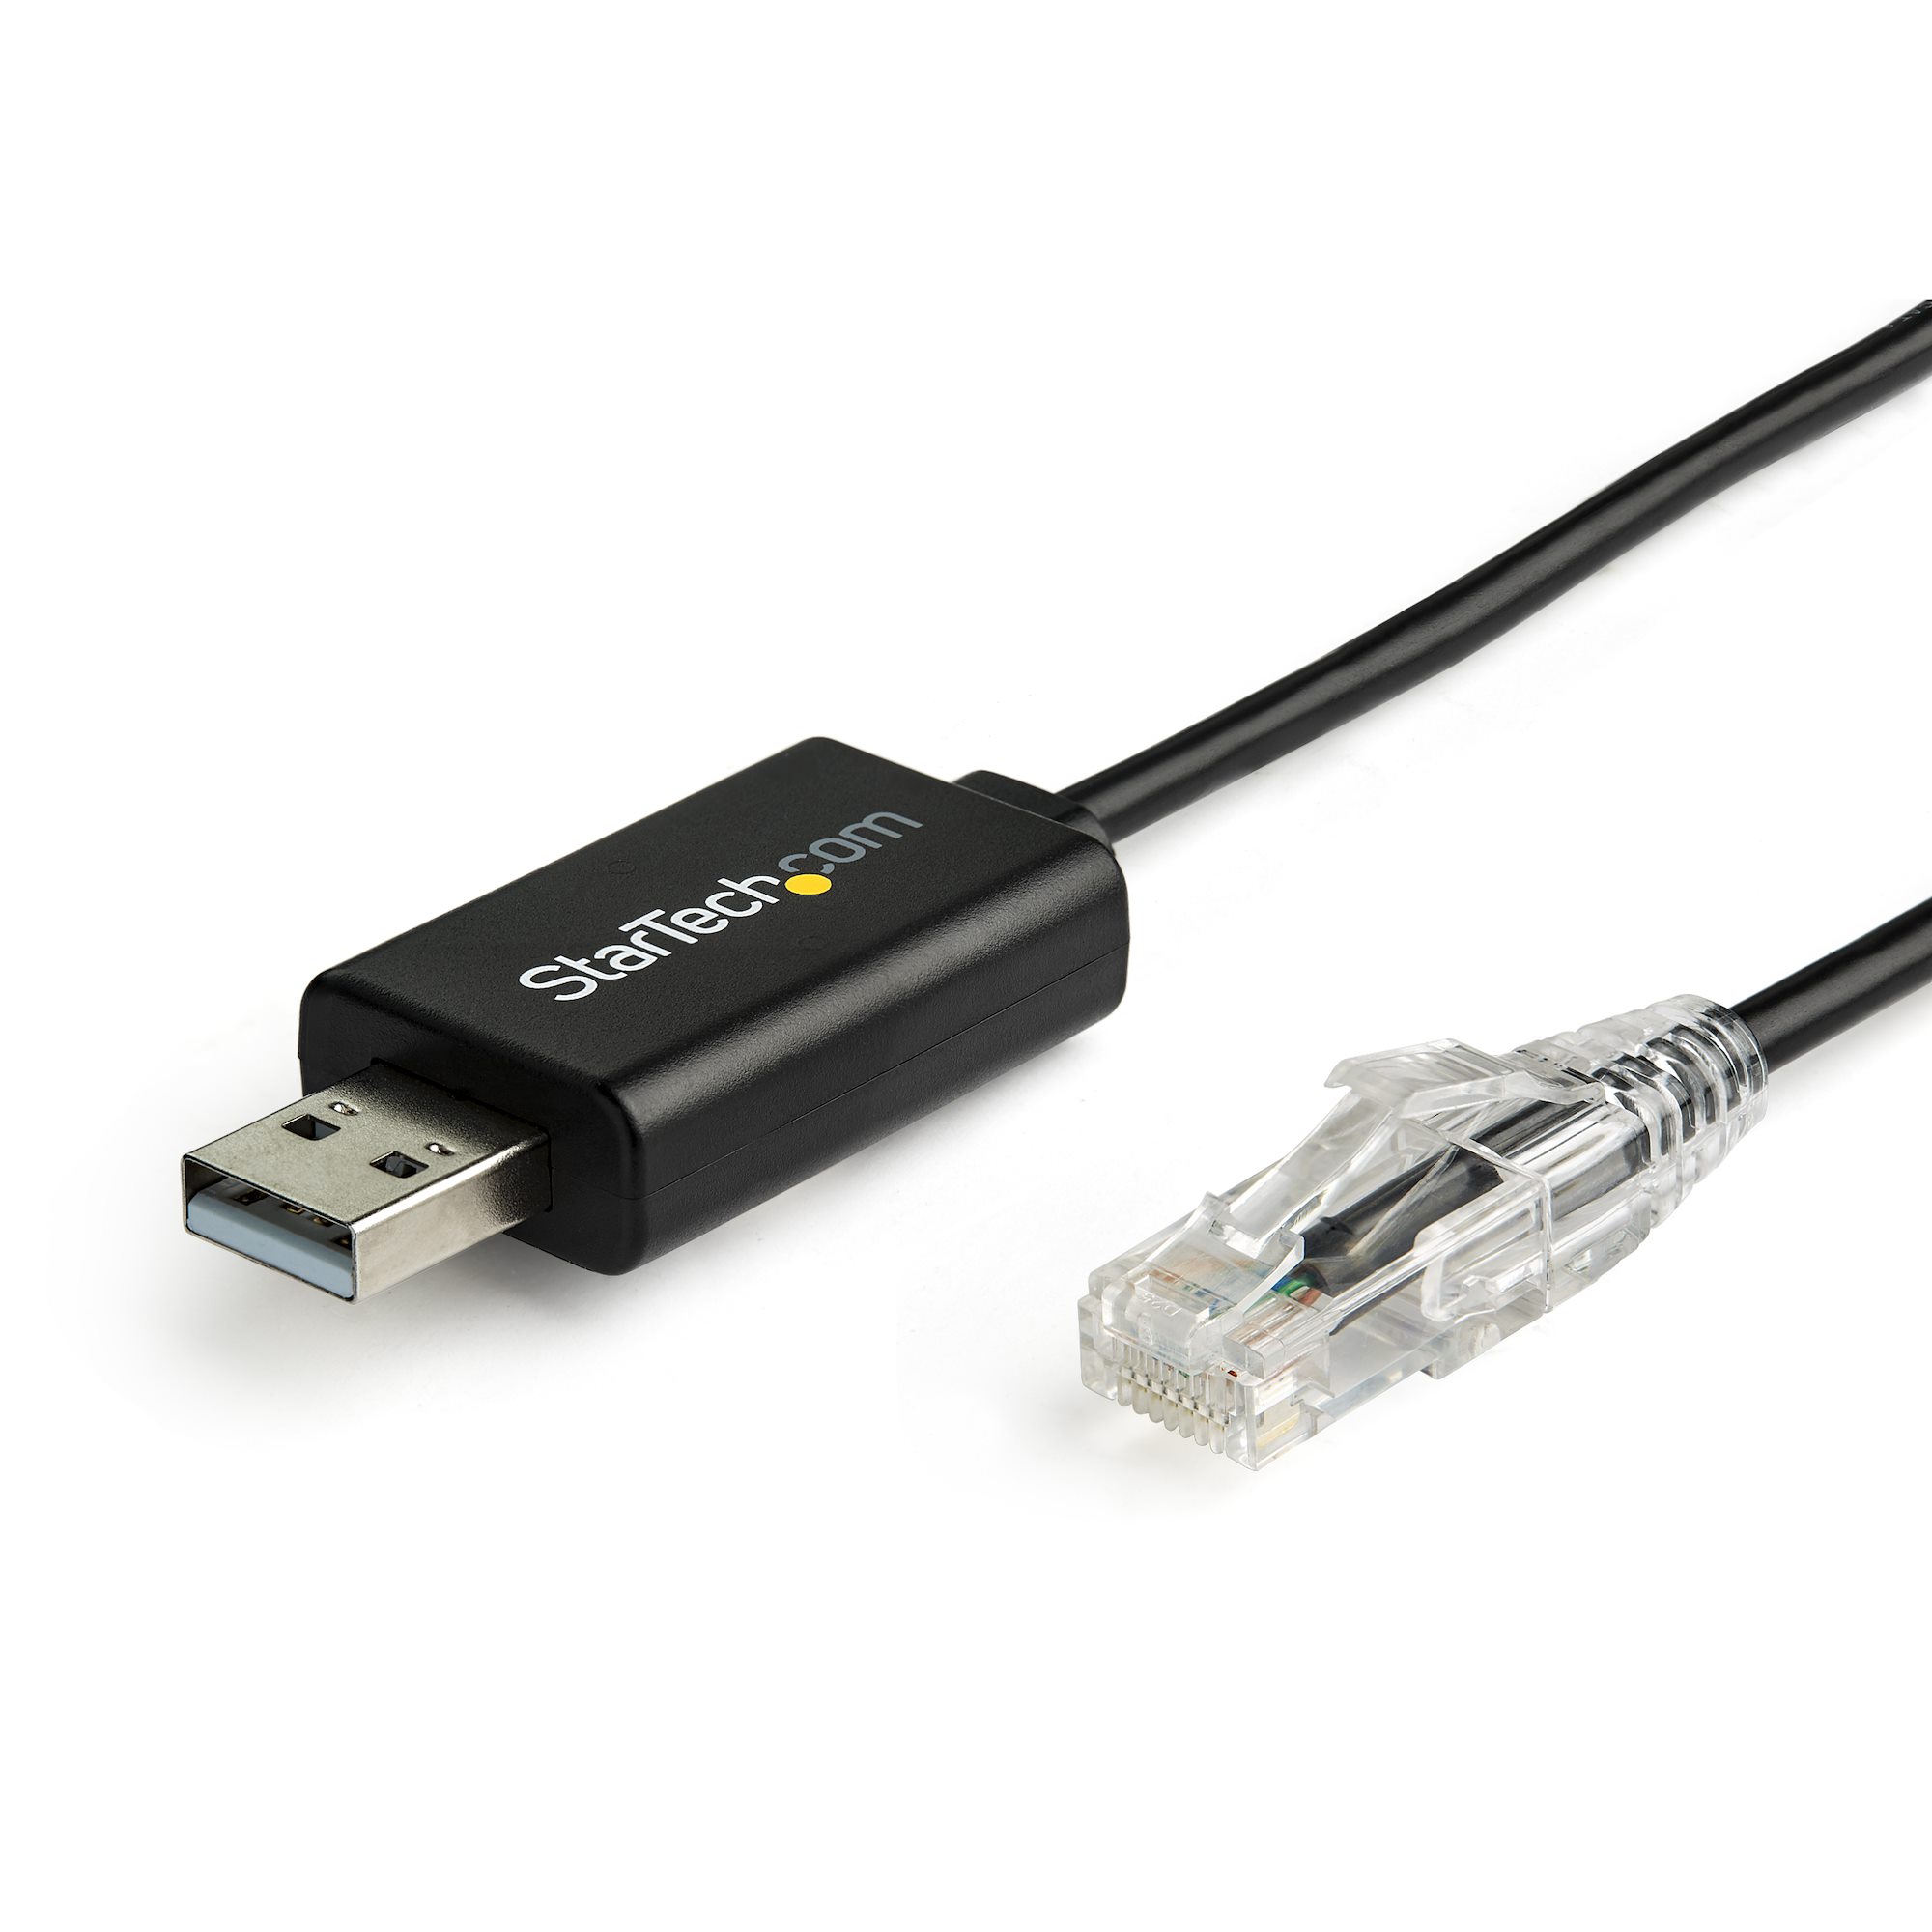 6 ft. (1.8 m) Cisco USB Console Cable - USB to RJ45